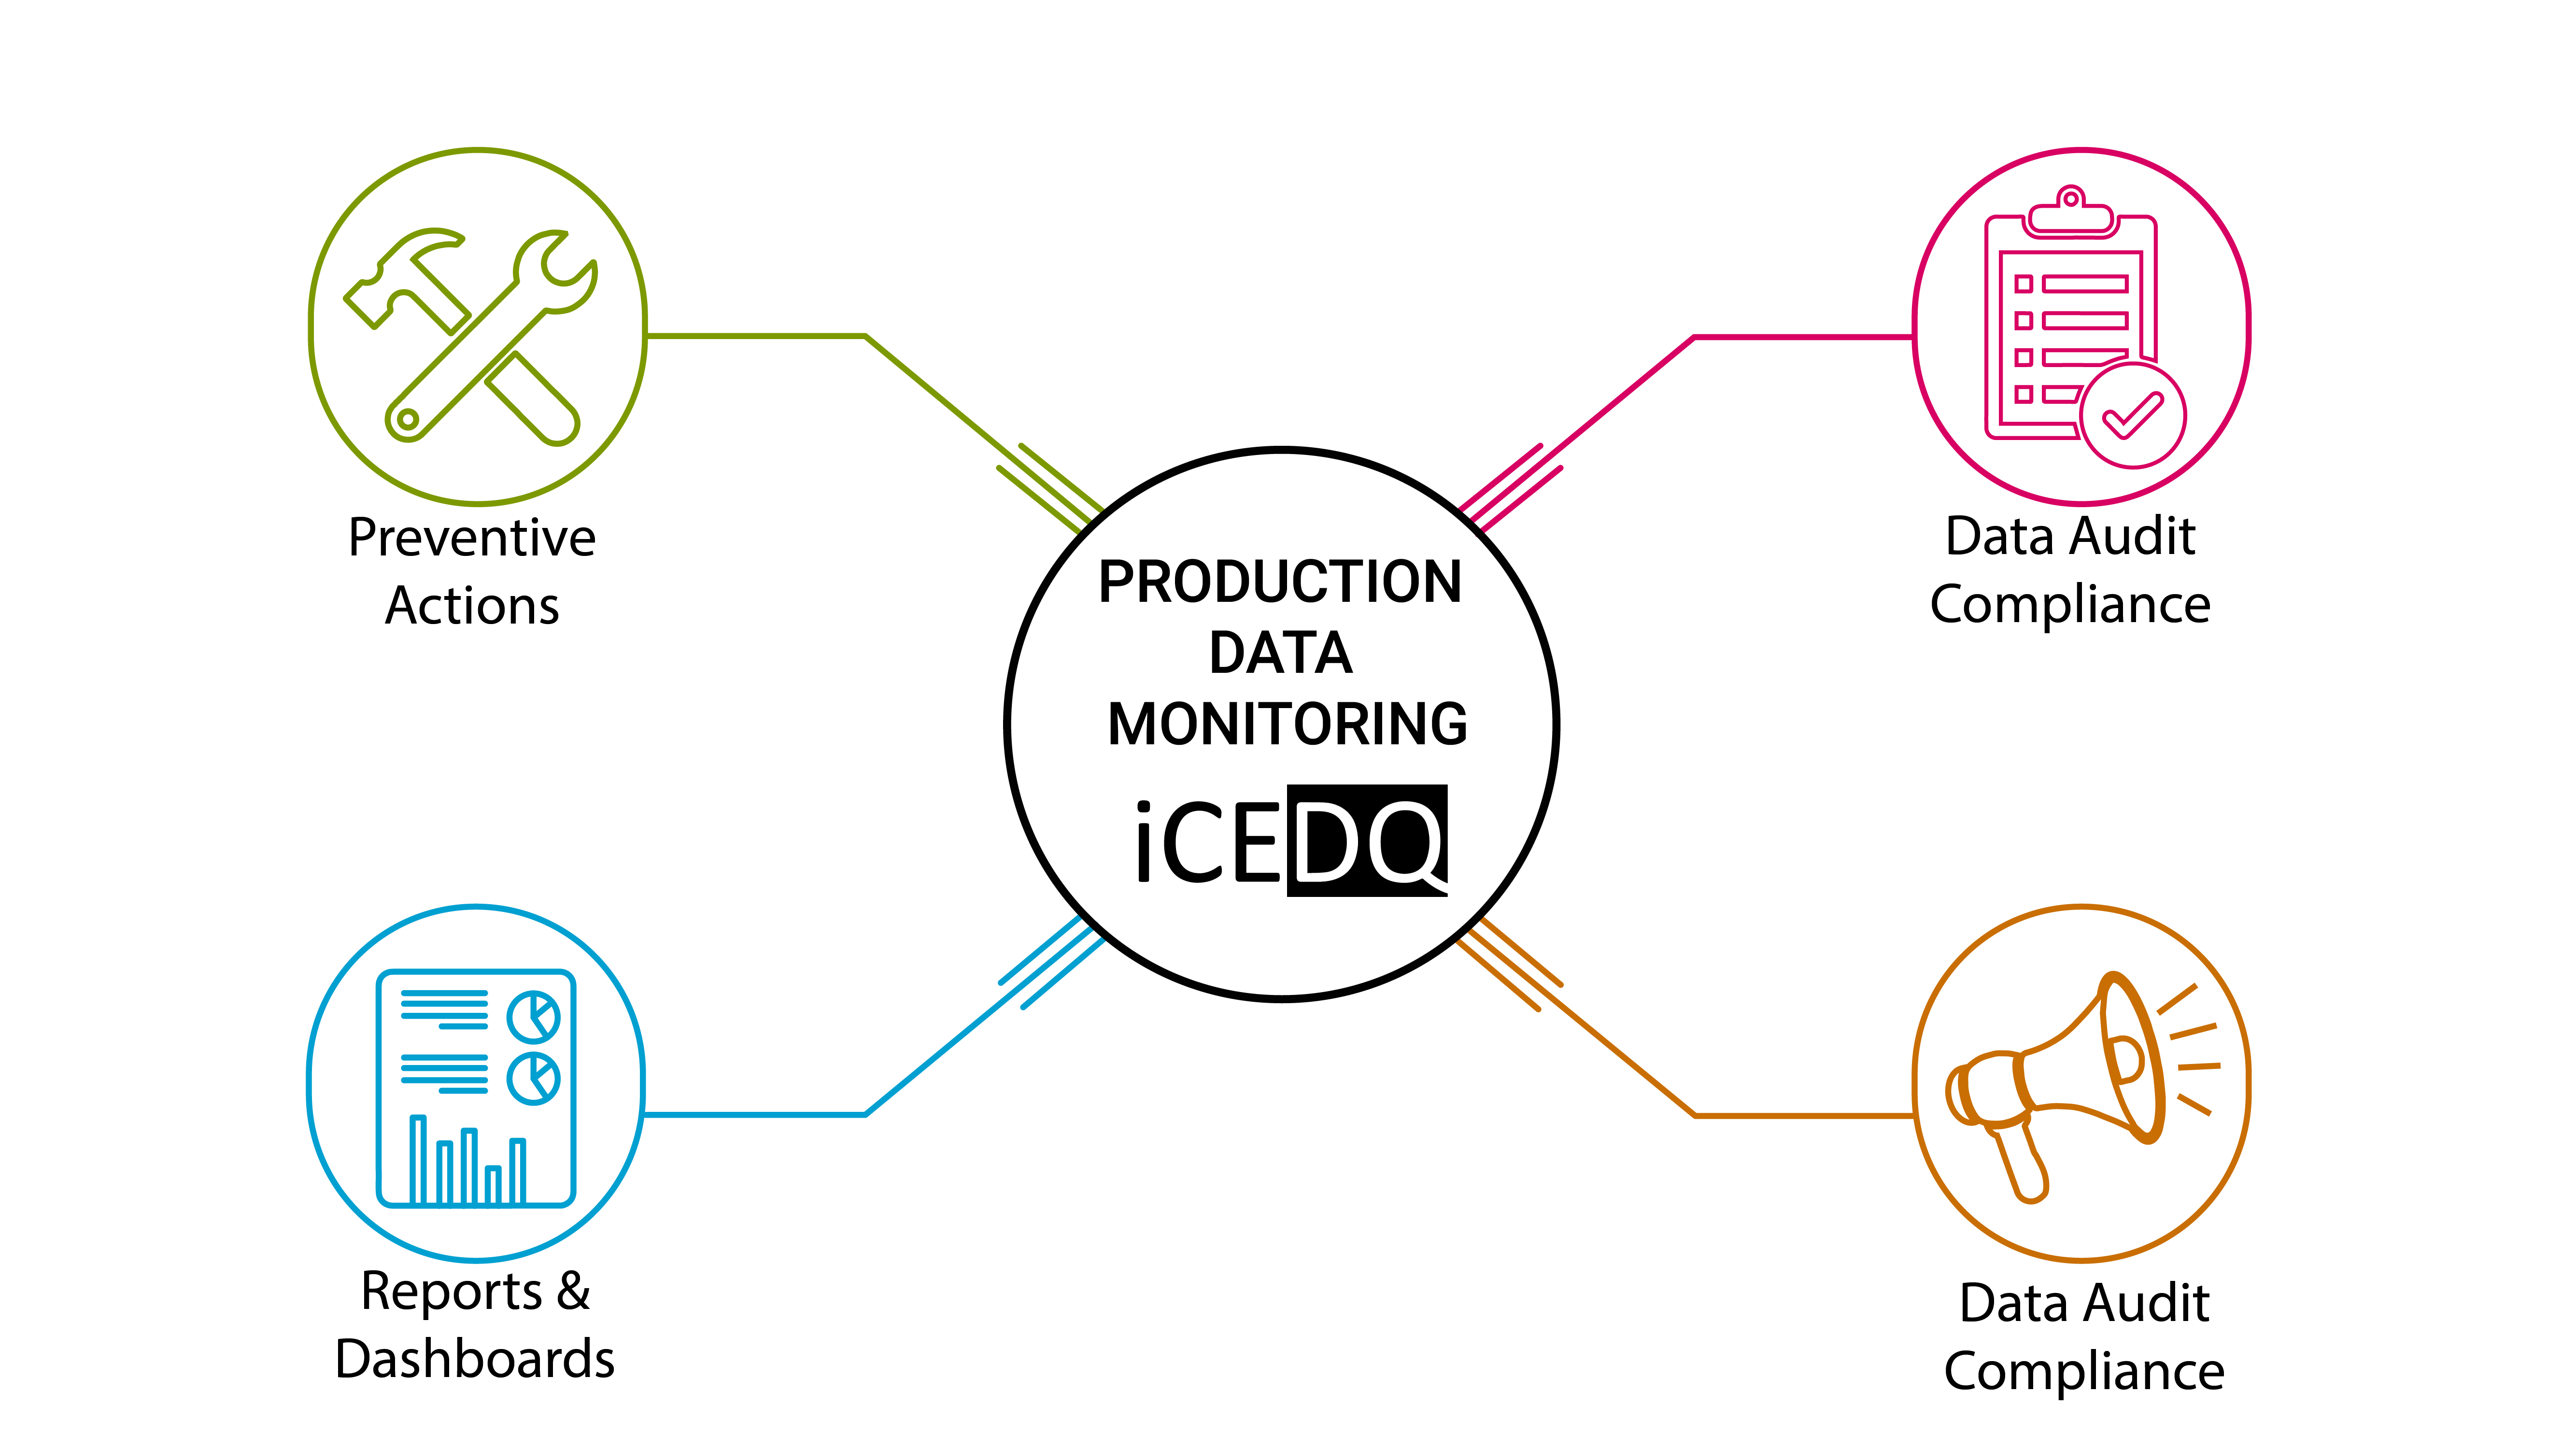 Product data monitoring with iCEDQ